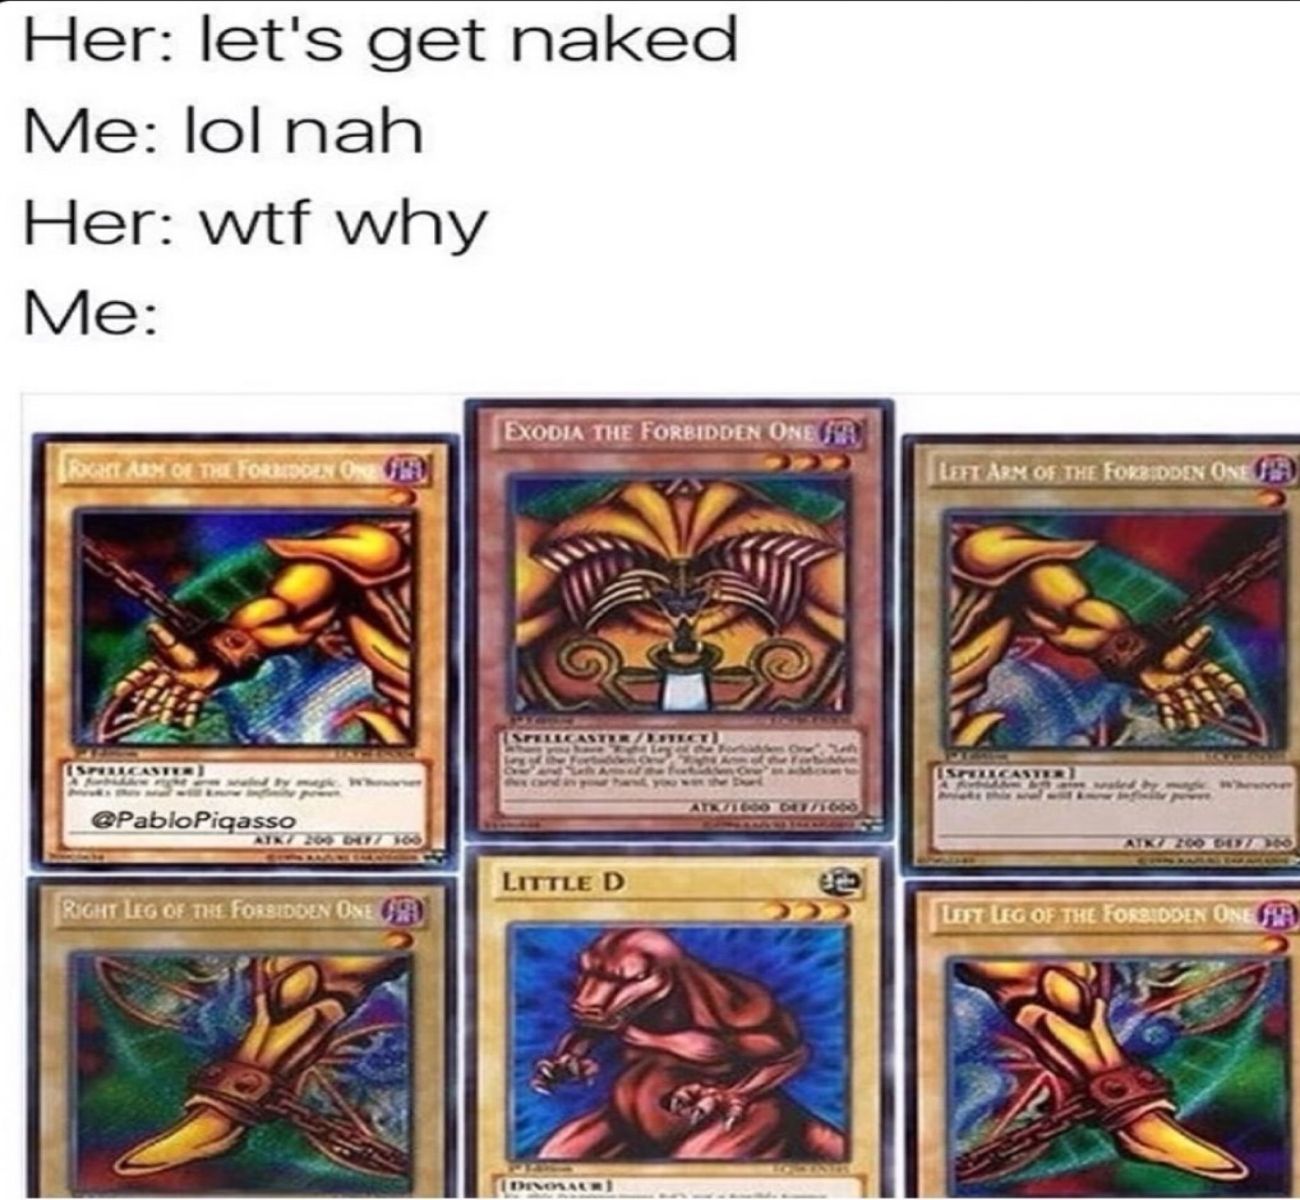 10 Hilarious Exodia Memes That Will Make You Cry.